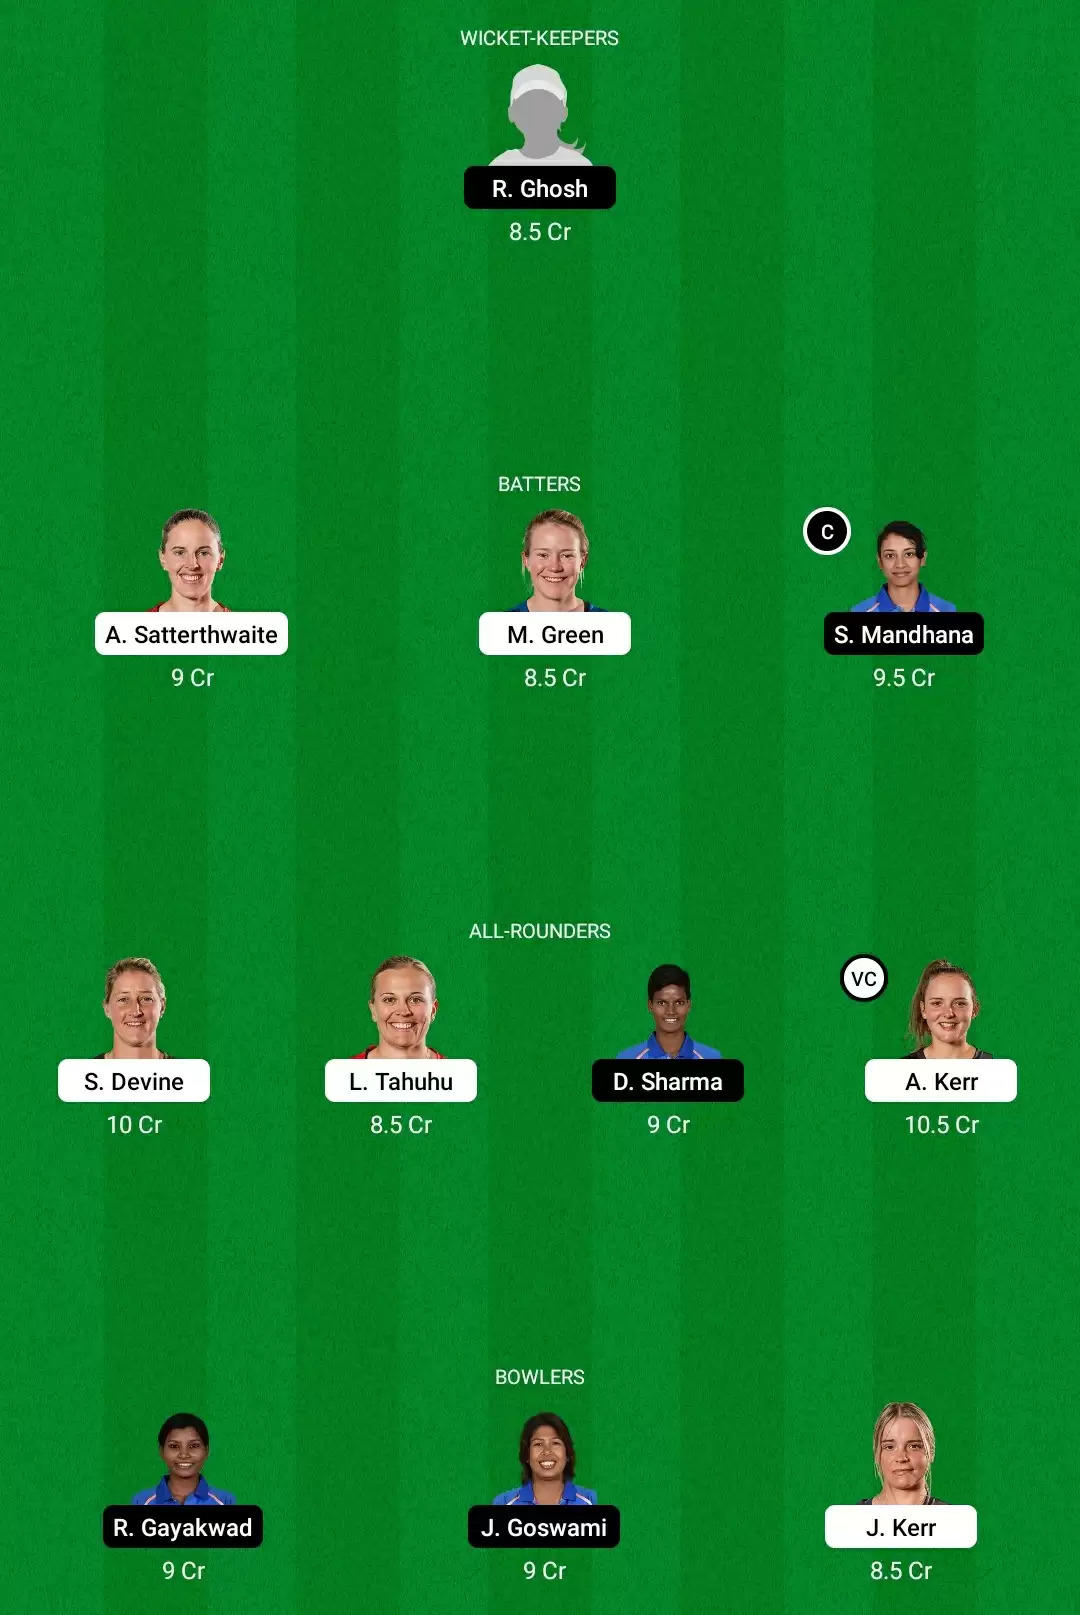 NZ-W vs IN-W Dream11 Prediction, Fantasy Cricket Tips, Playing XI, Dream11 Team, Pitch And Weather Report – New Zealand Women vs India Women Match, ICC Women’s World Cup 2022